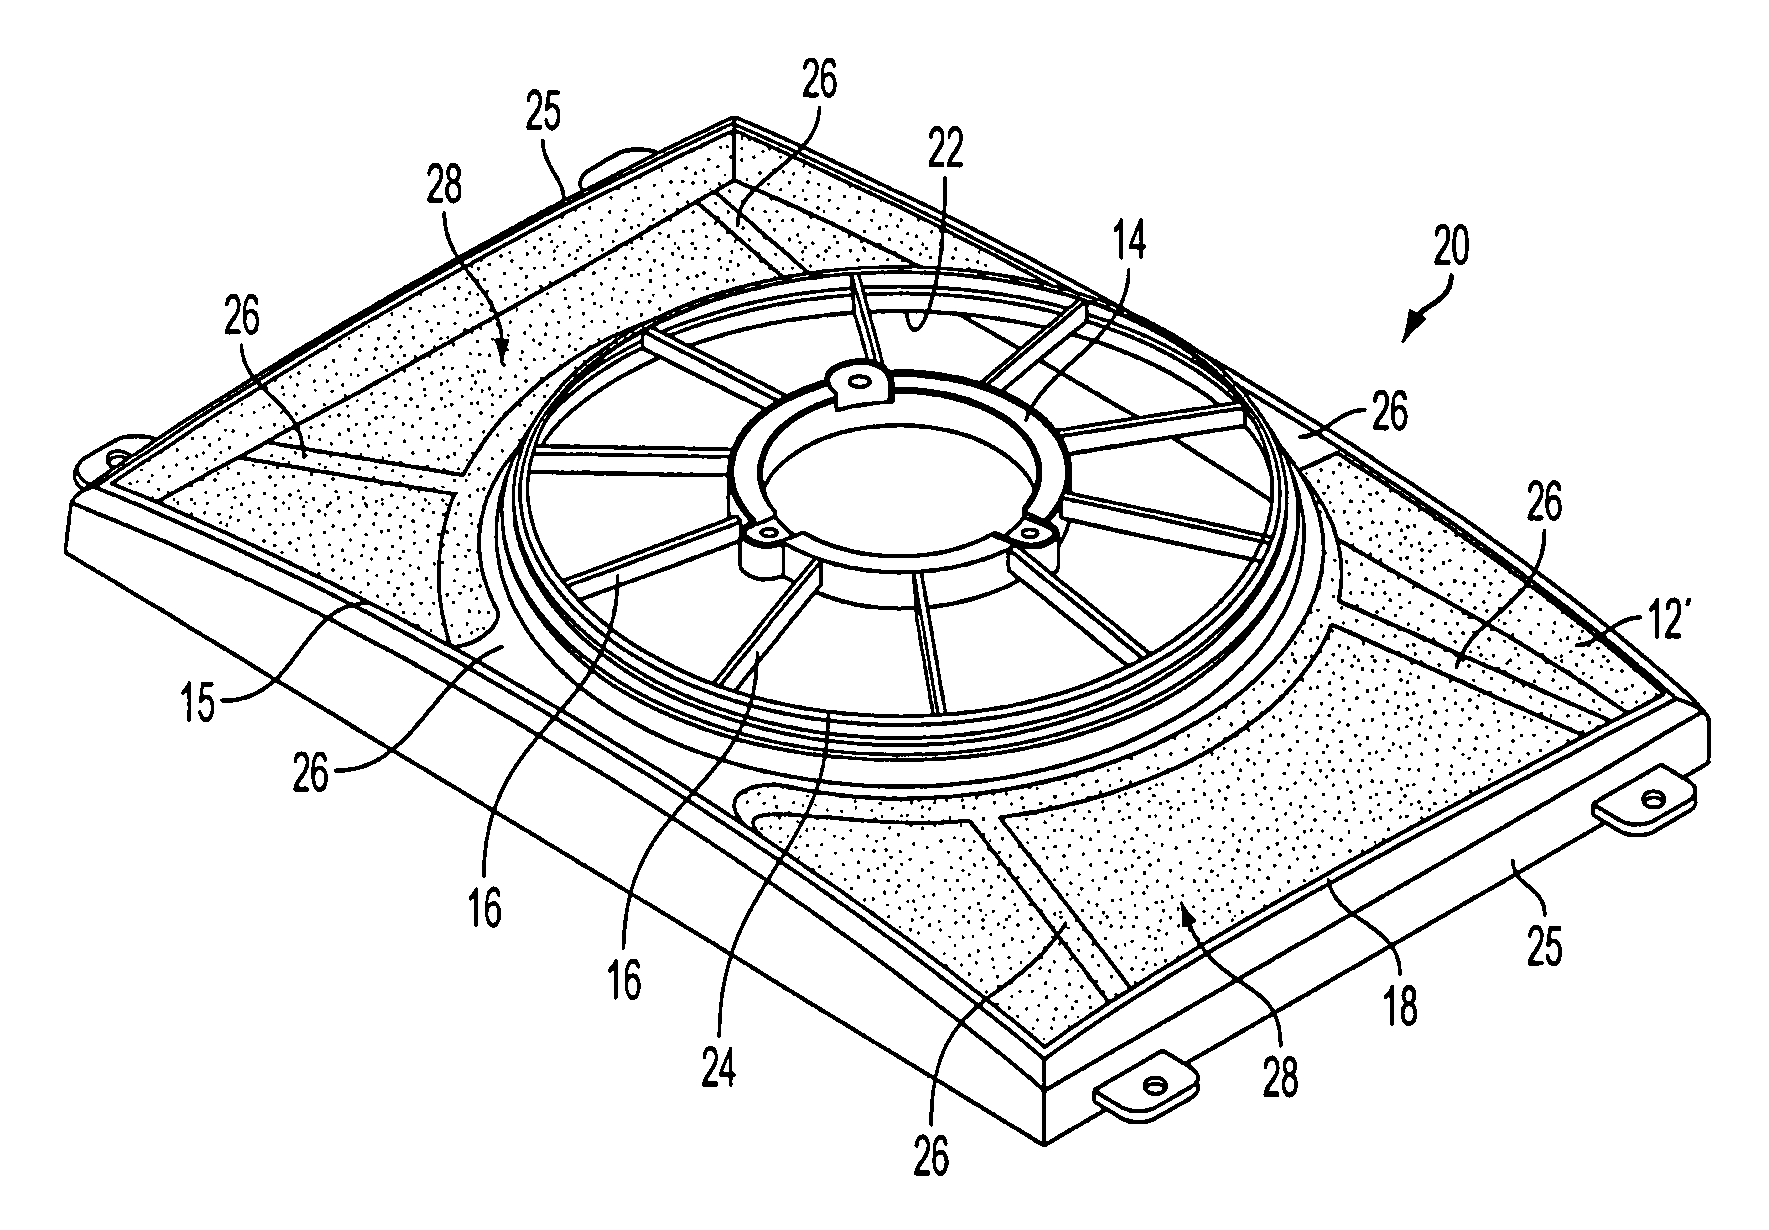 Low mass fan shroud with integrated membrane barrier